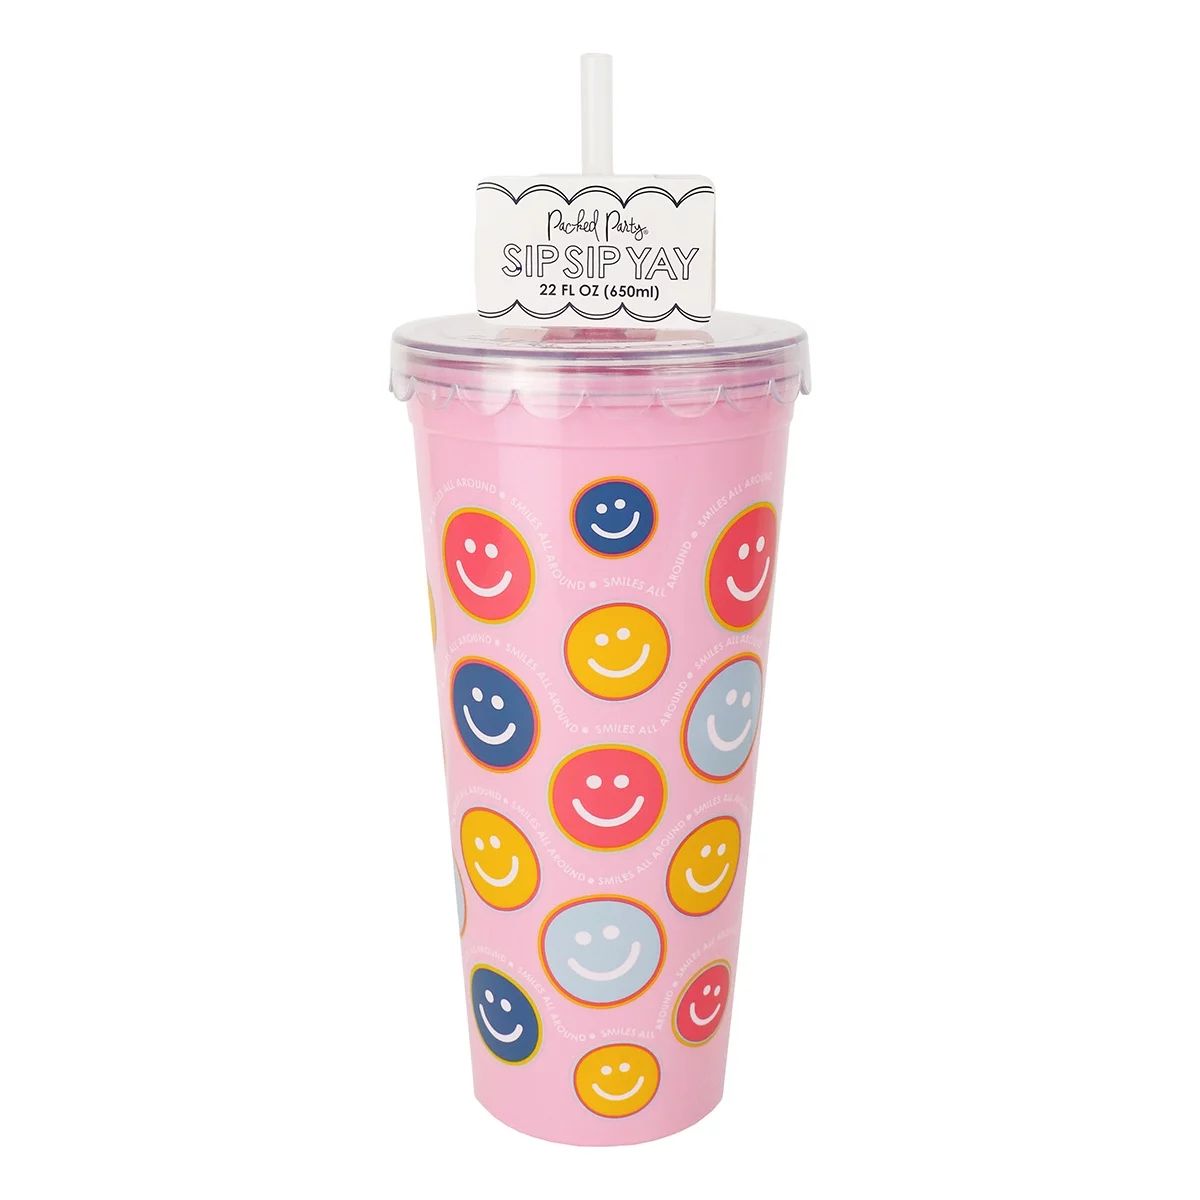 Packed Party "It's All Smiles" 22 oz BPA Free Plastic Tumbler, Everyday | Walmart (US)